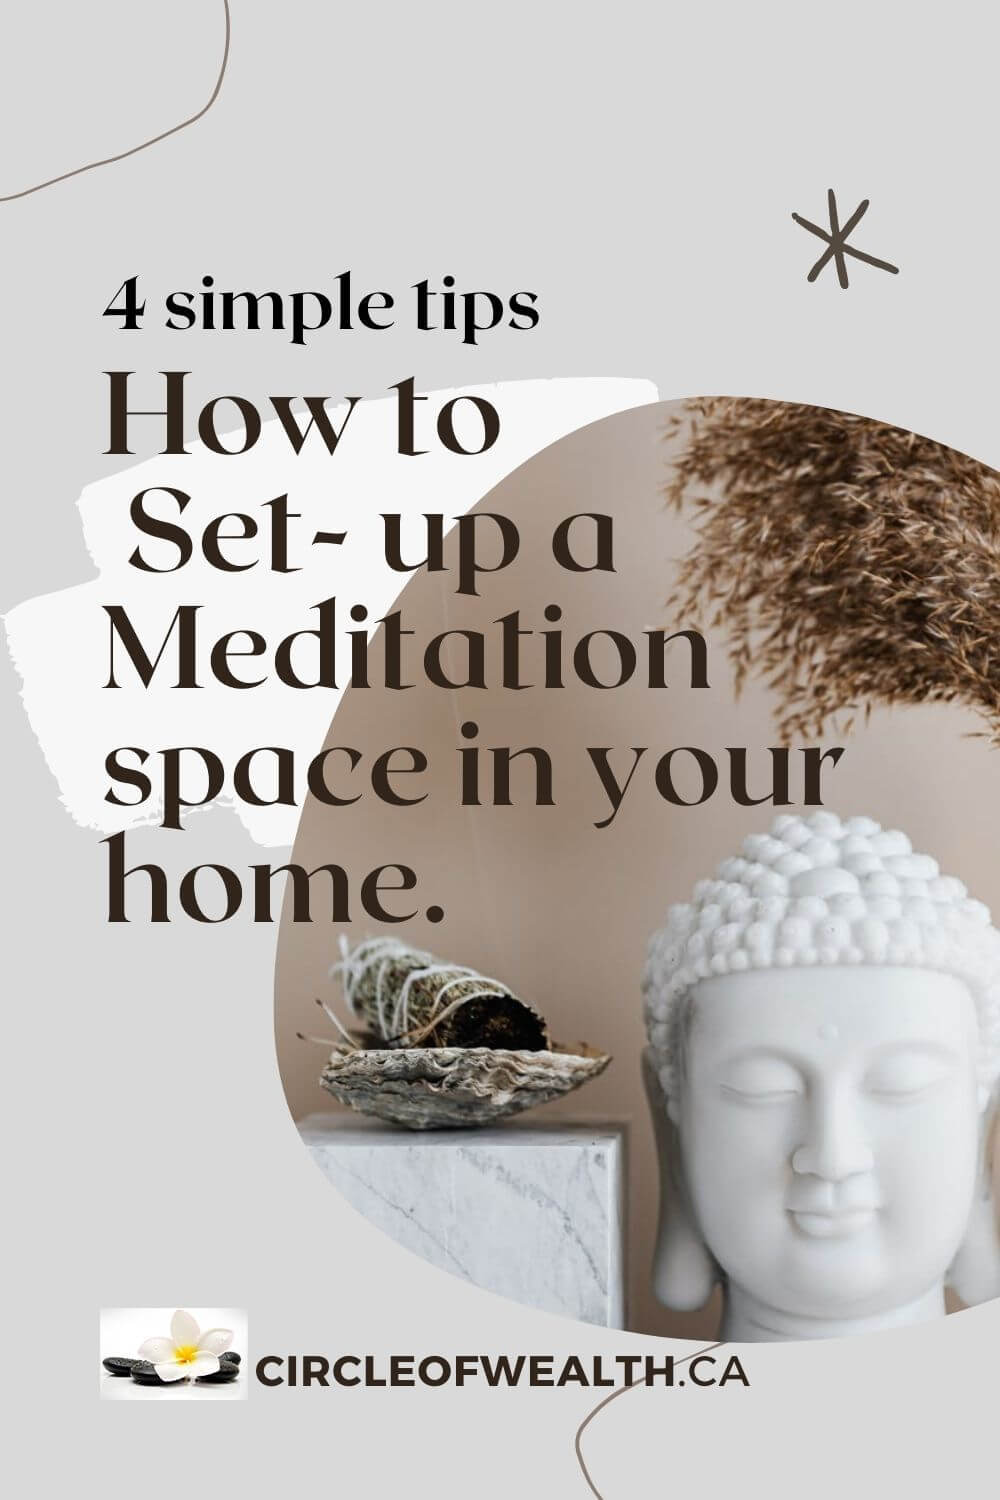 4 simple tips How to Set up a Meditation SPace in your Home